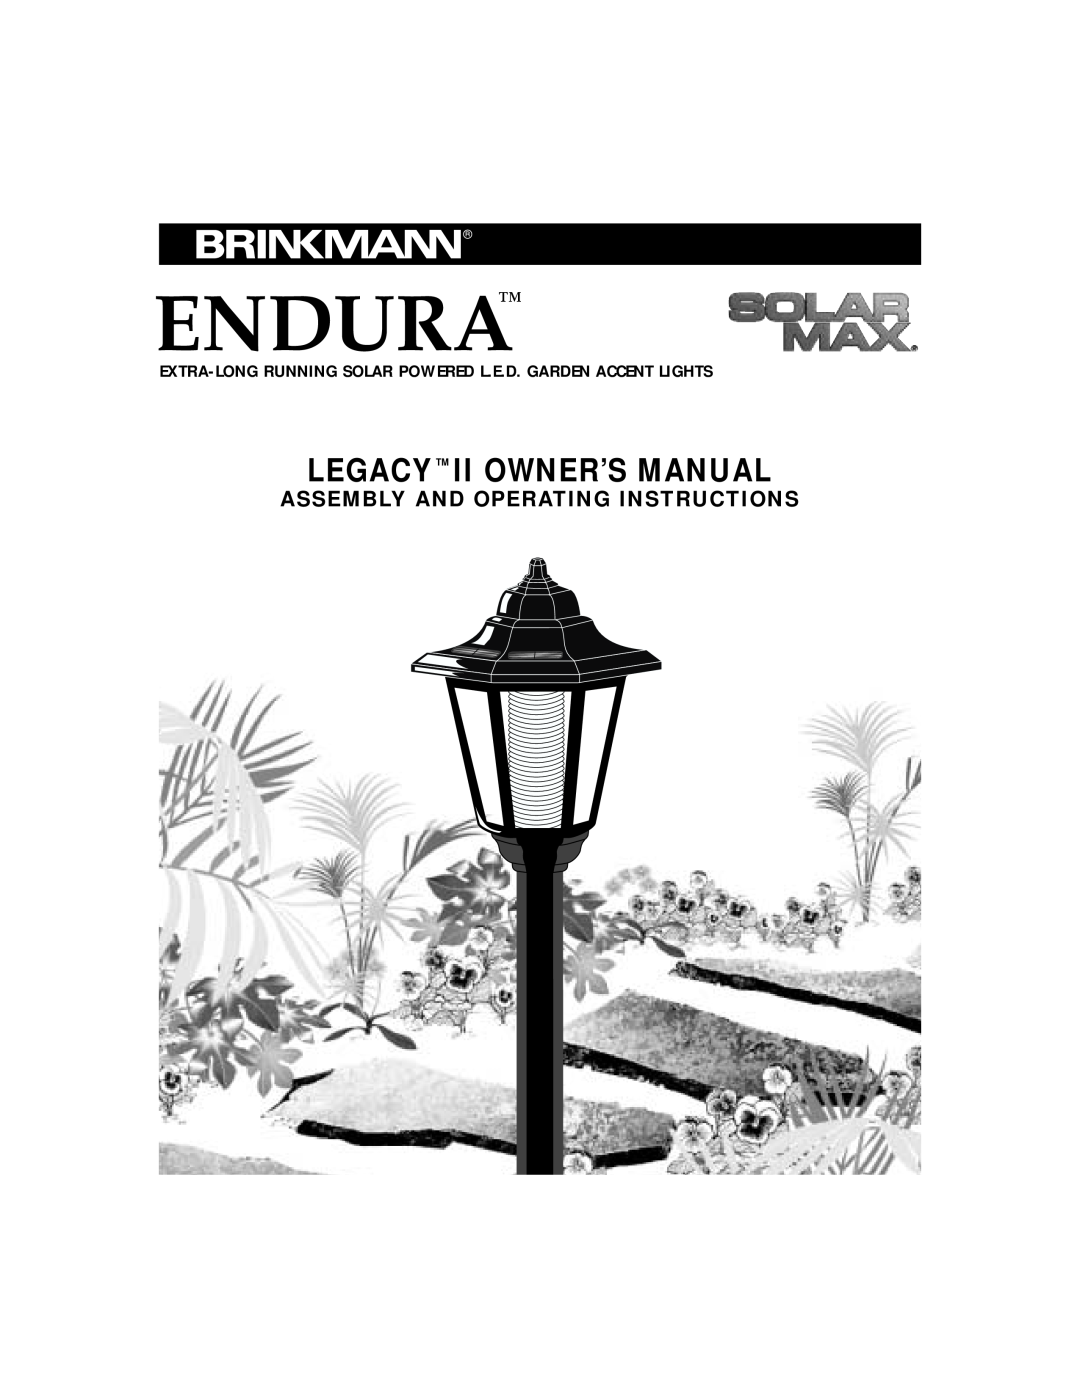 Brinkmann Solar Powered L.E.D. Garden Accent Light owner manual Assembly And Operating Instructions, Endura 